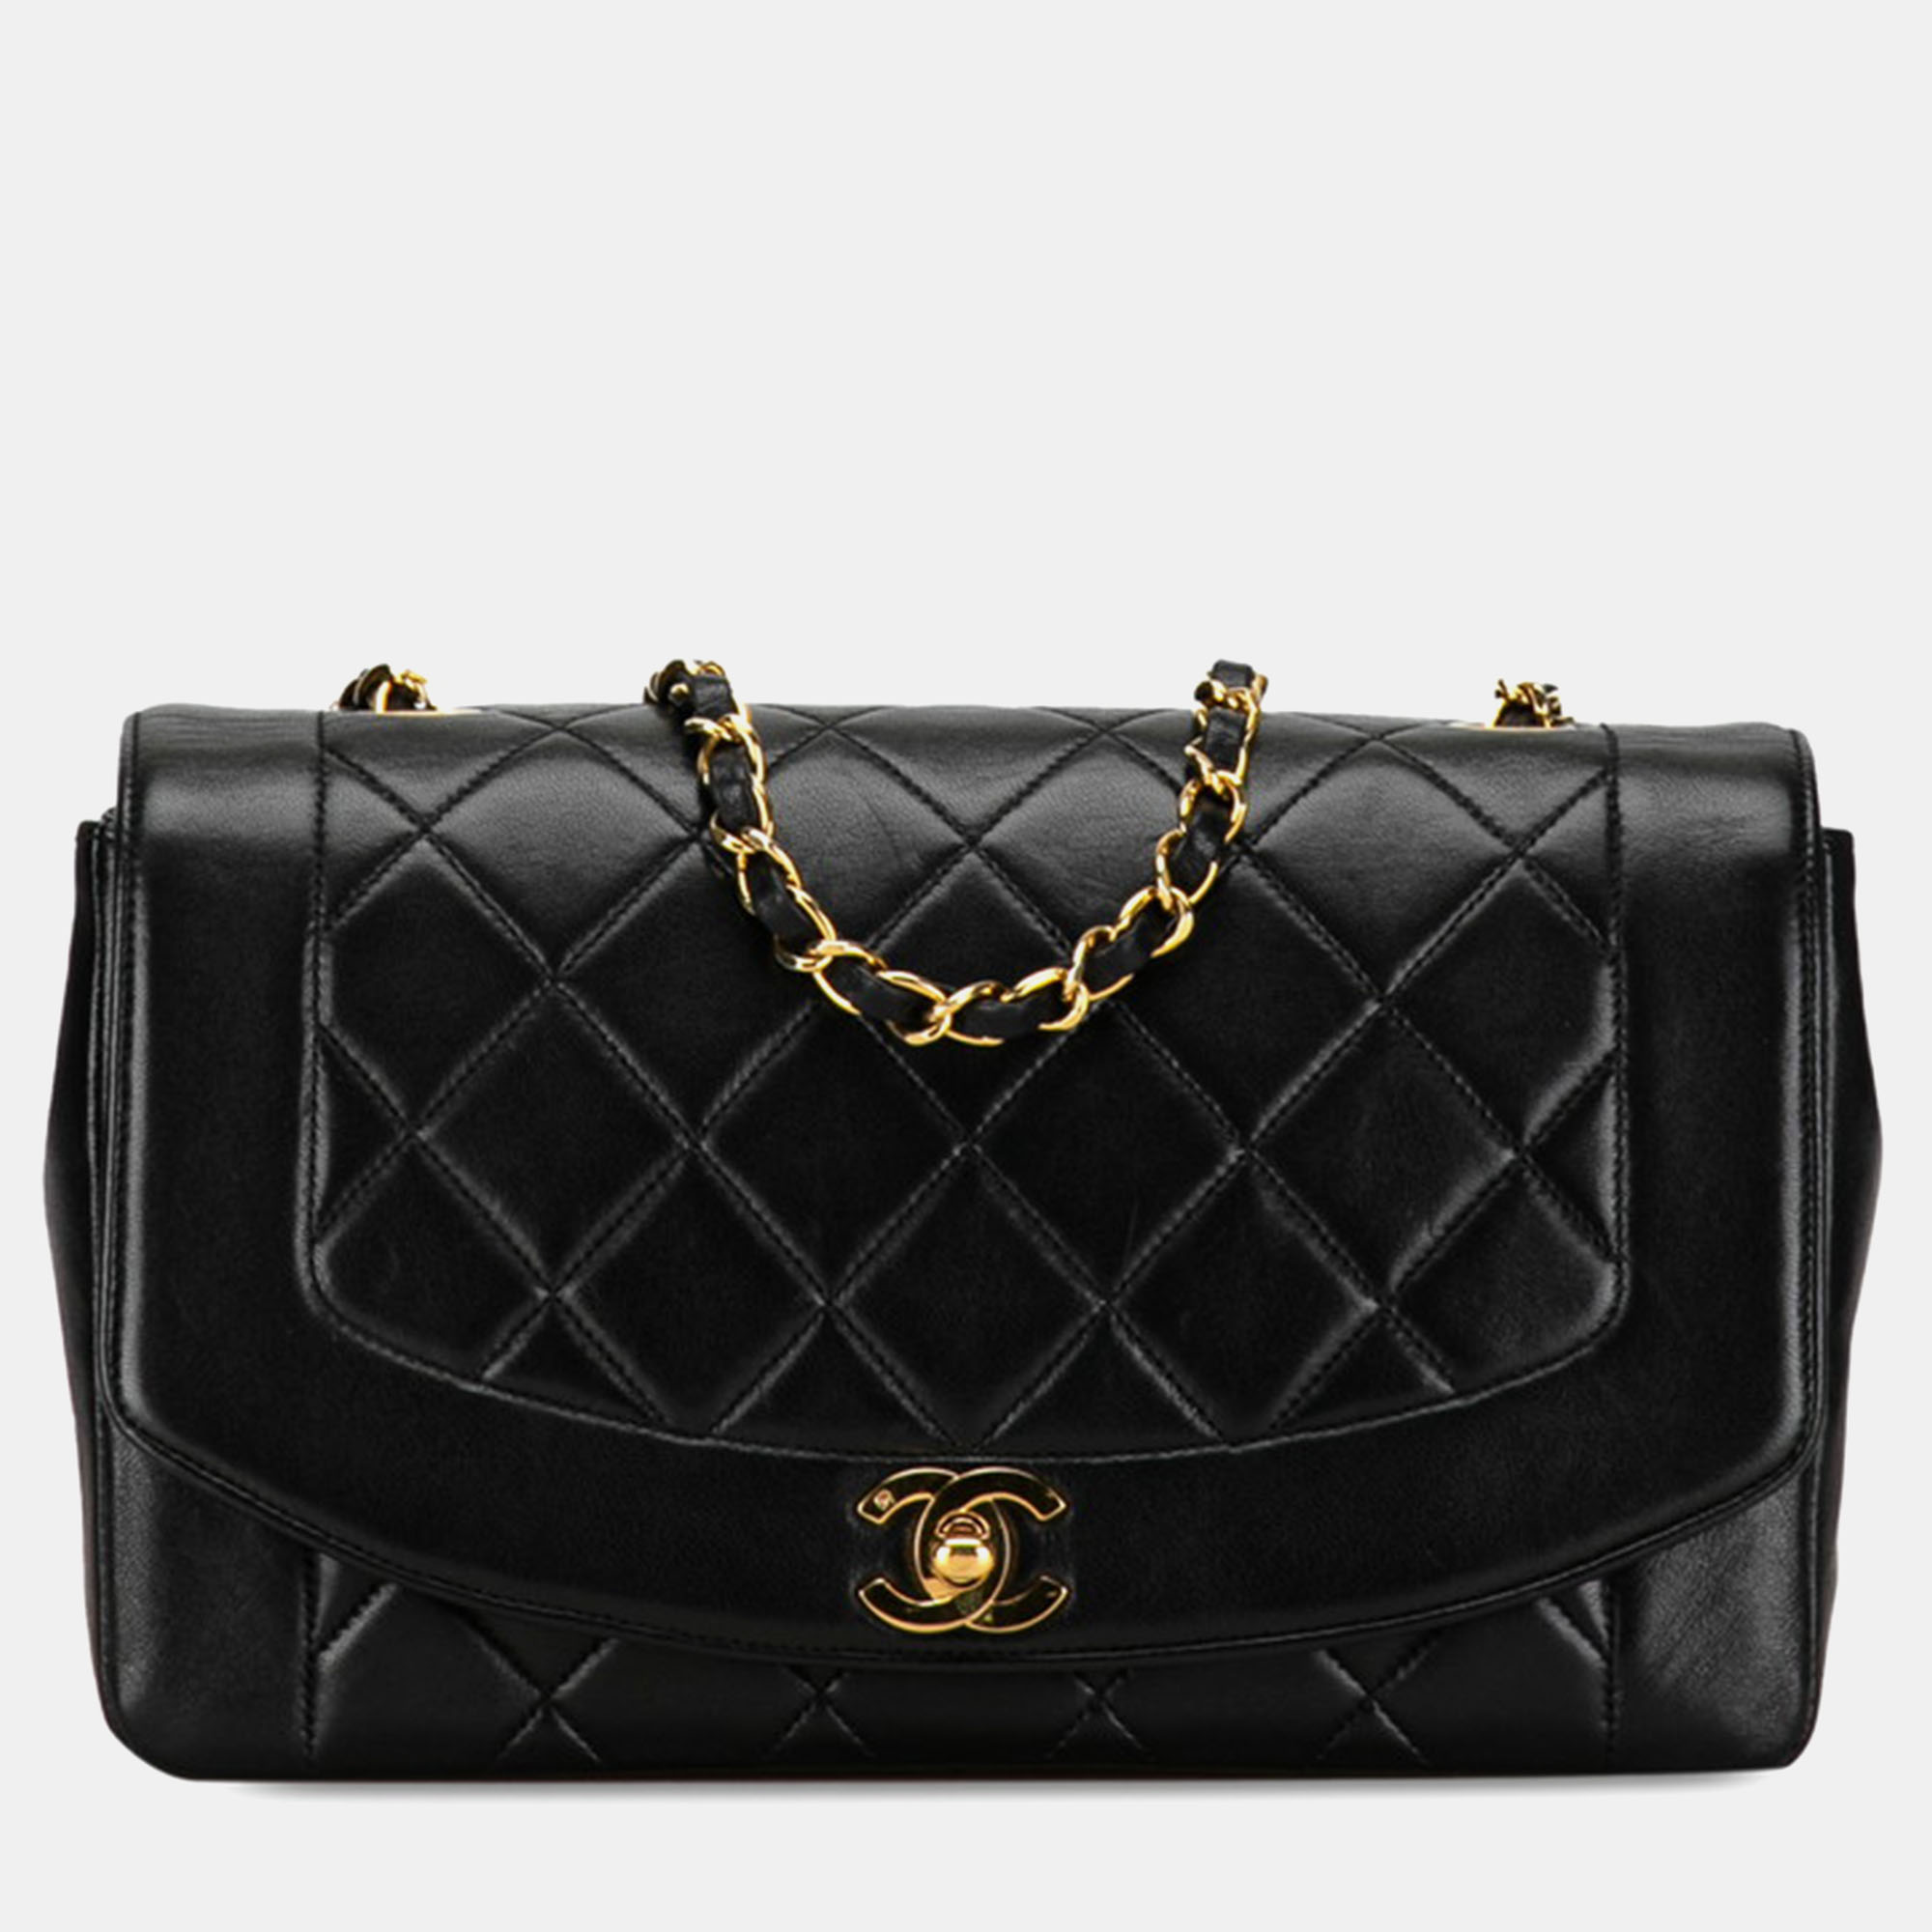 Pre-owned Chanel Black Leather Diana Flap Crossbody Bag